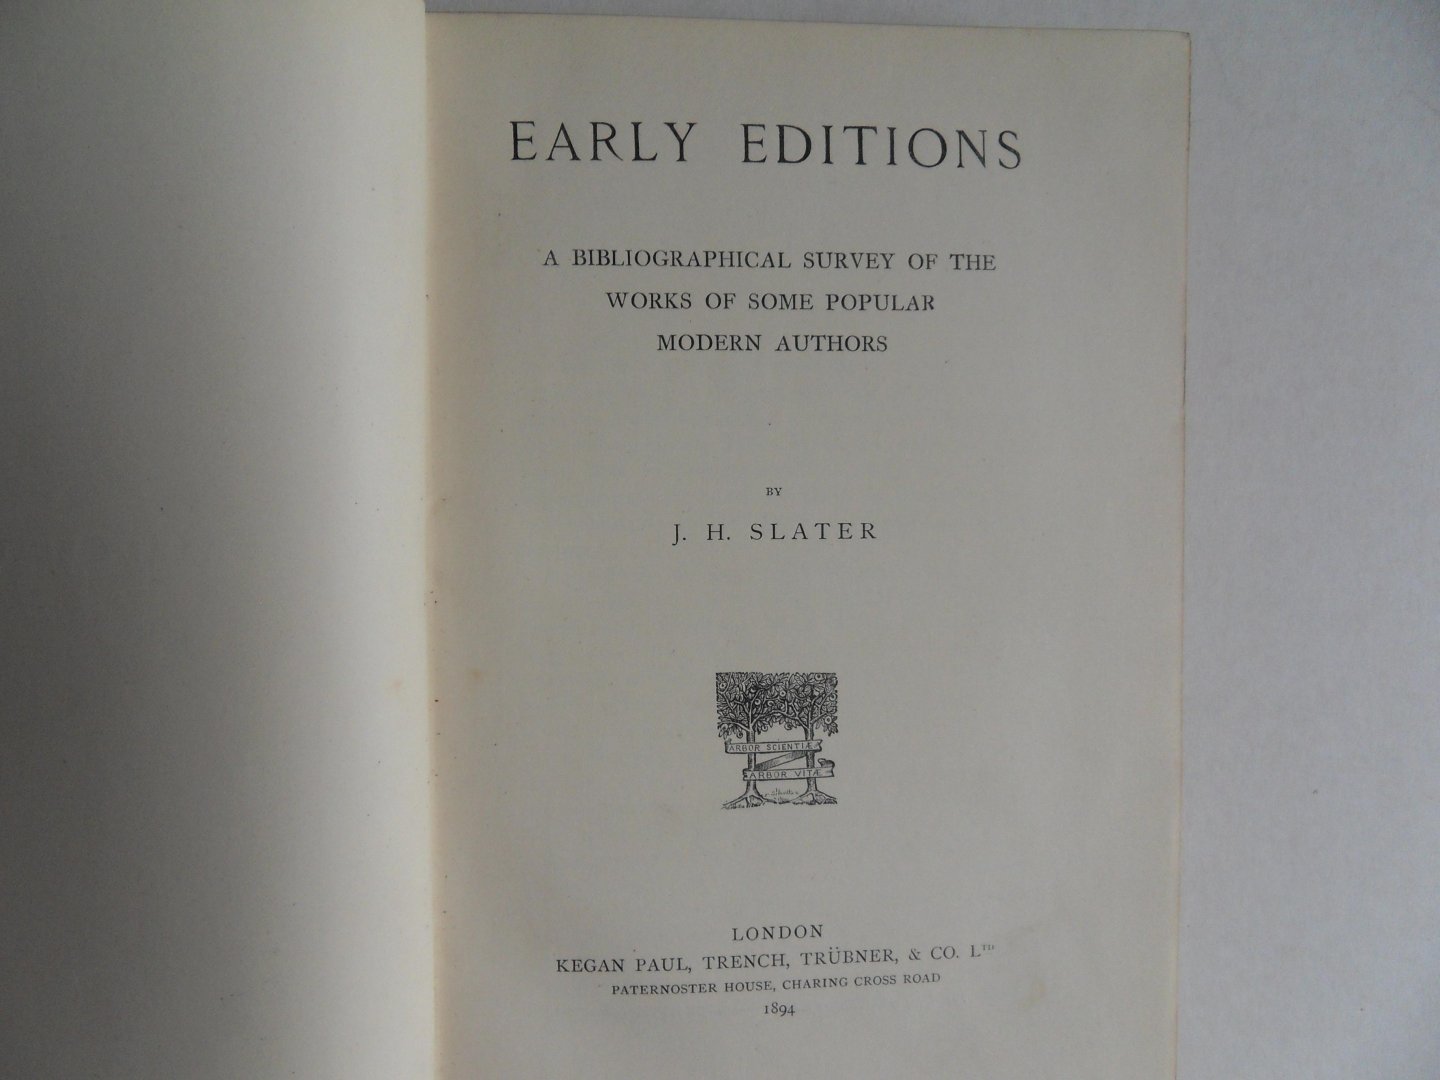 Slater, J.H. - Early Editions. - A Bibliographical Survey of the Works of Some Popular Modern Authors.